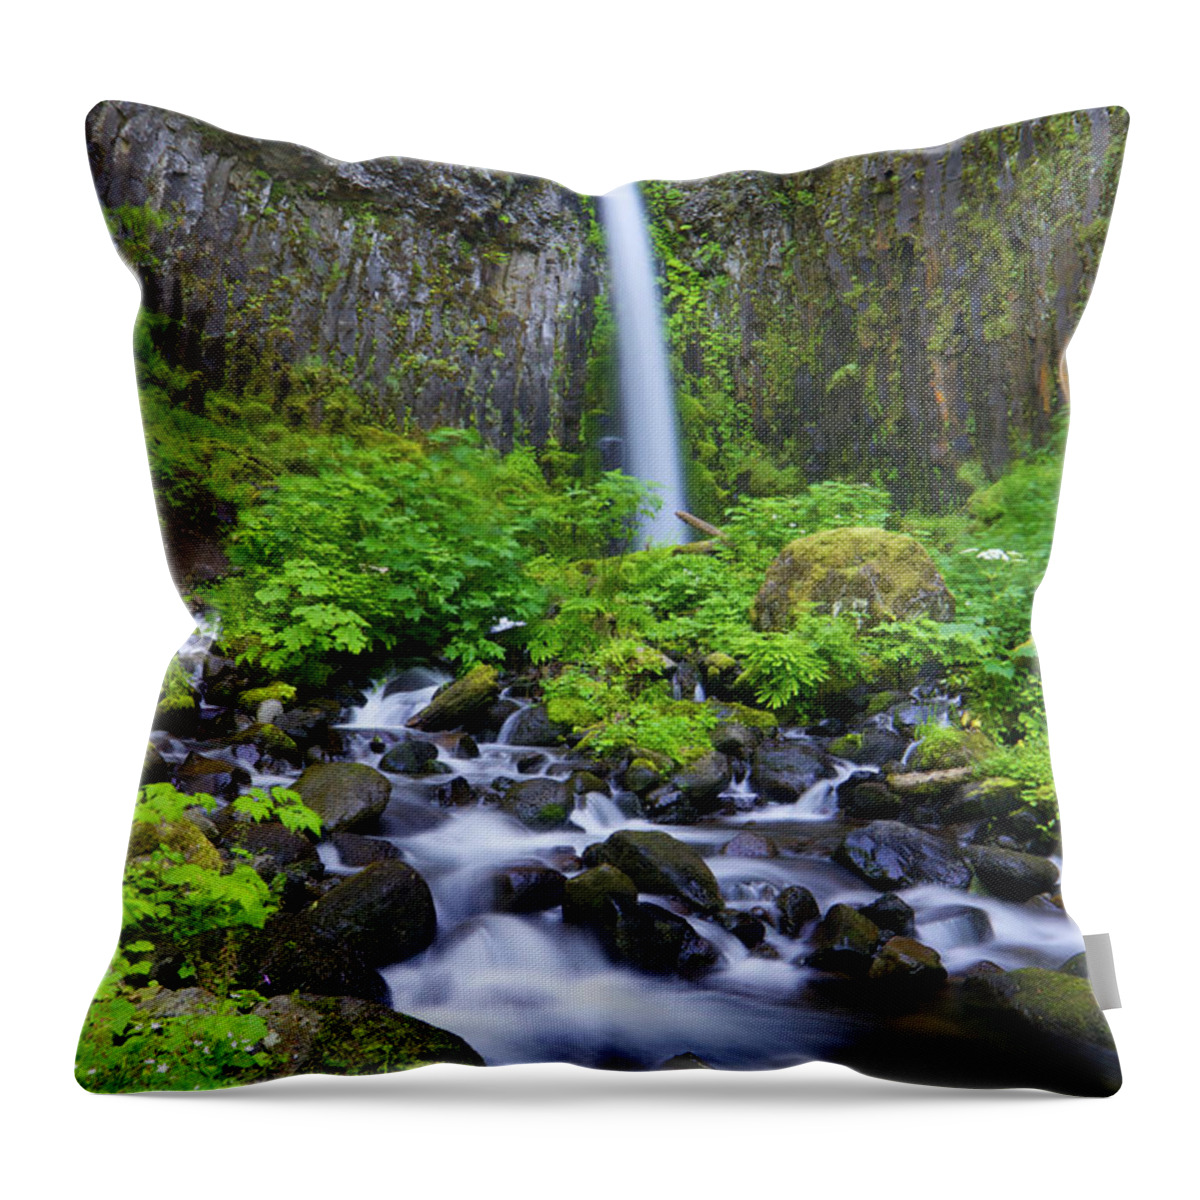 Waterfall Throw Pillow featuring the photograph Dry Creek Falls by Bruce Block